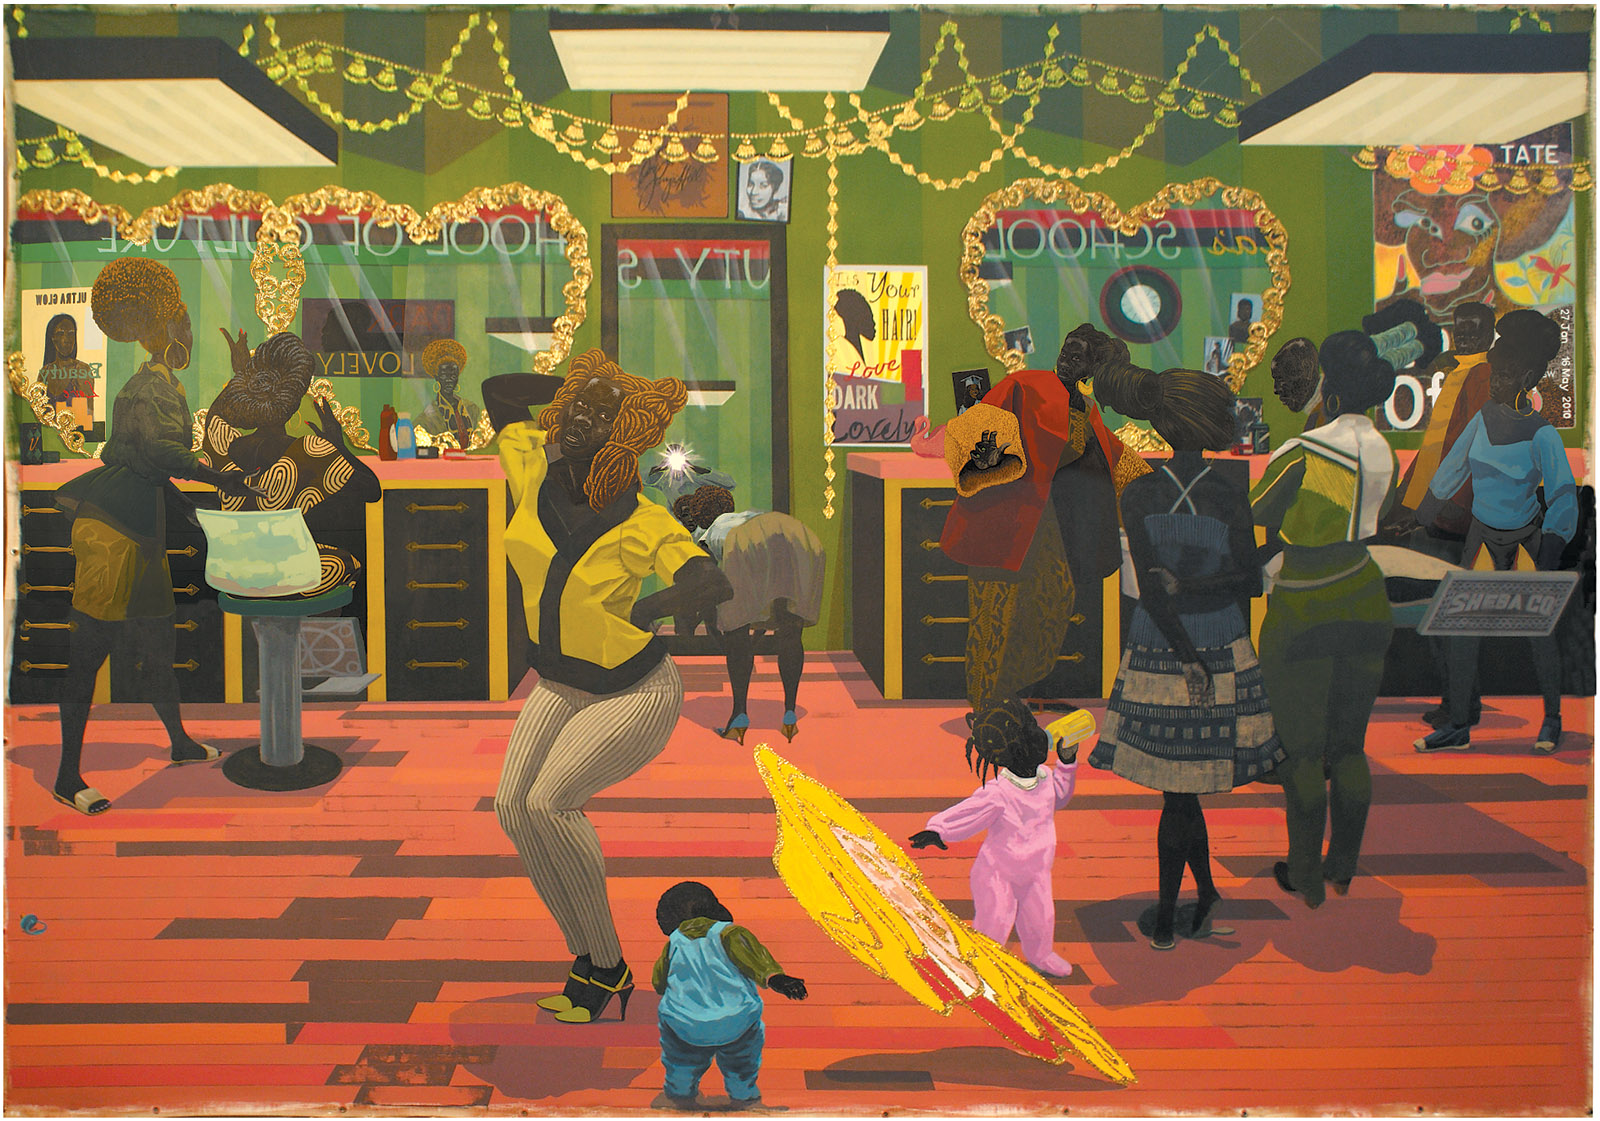 Kerry James Marshall: School of Beauty, School of Culture, 107 7/8 x 157 7/8 inches, 2012